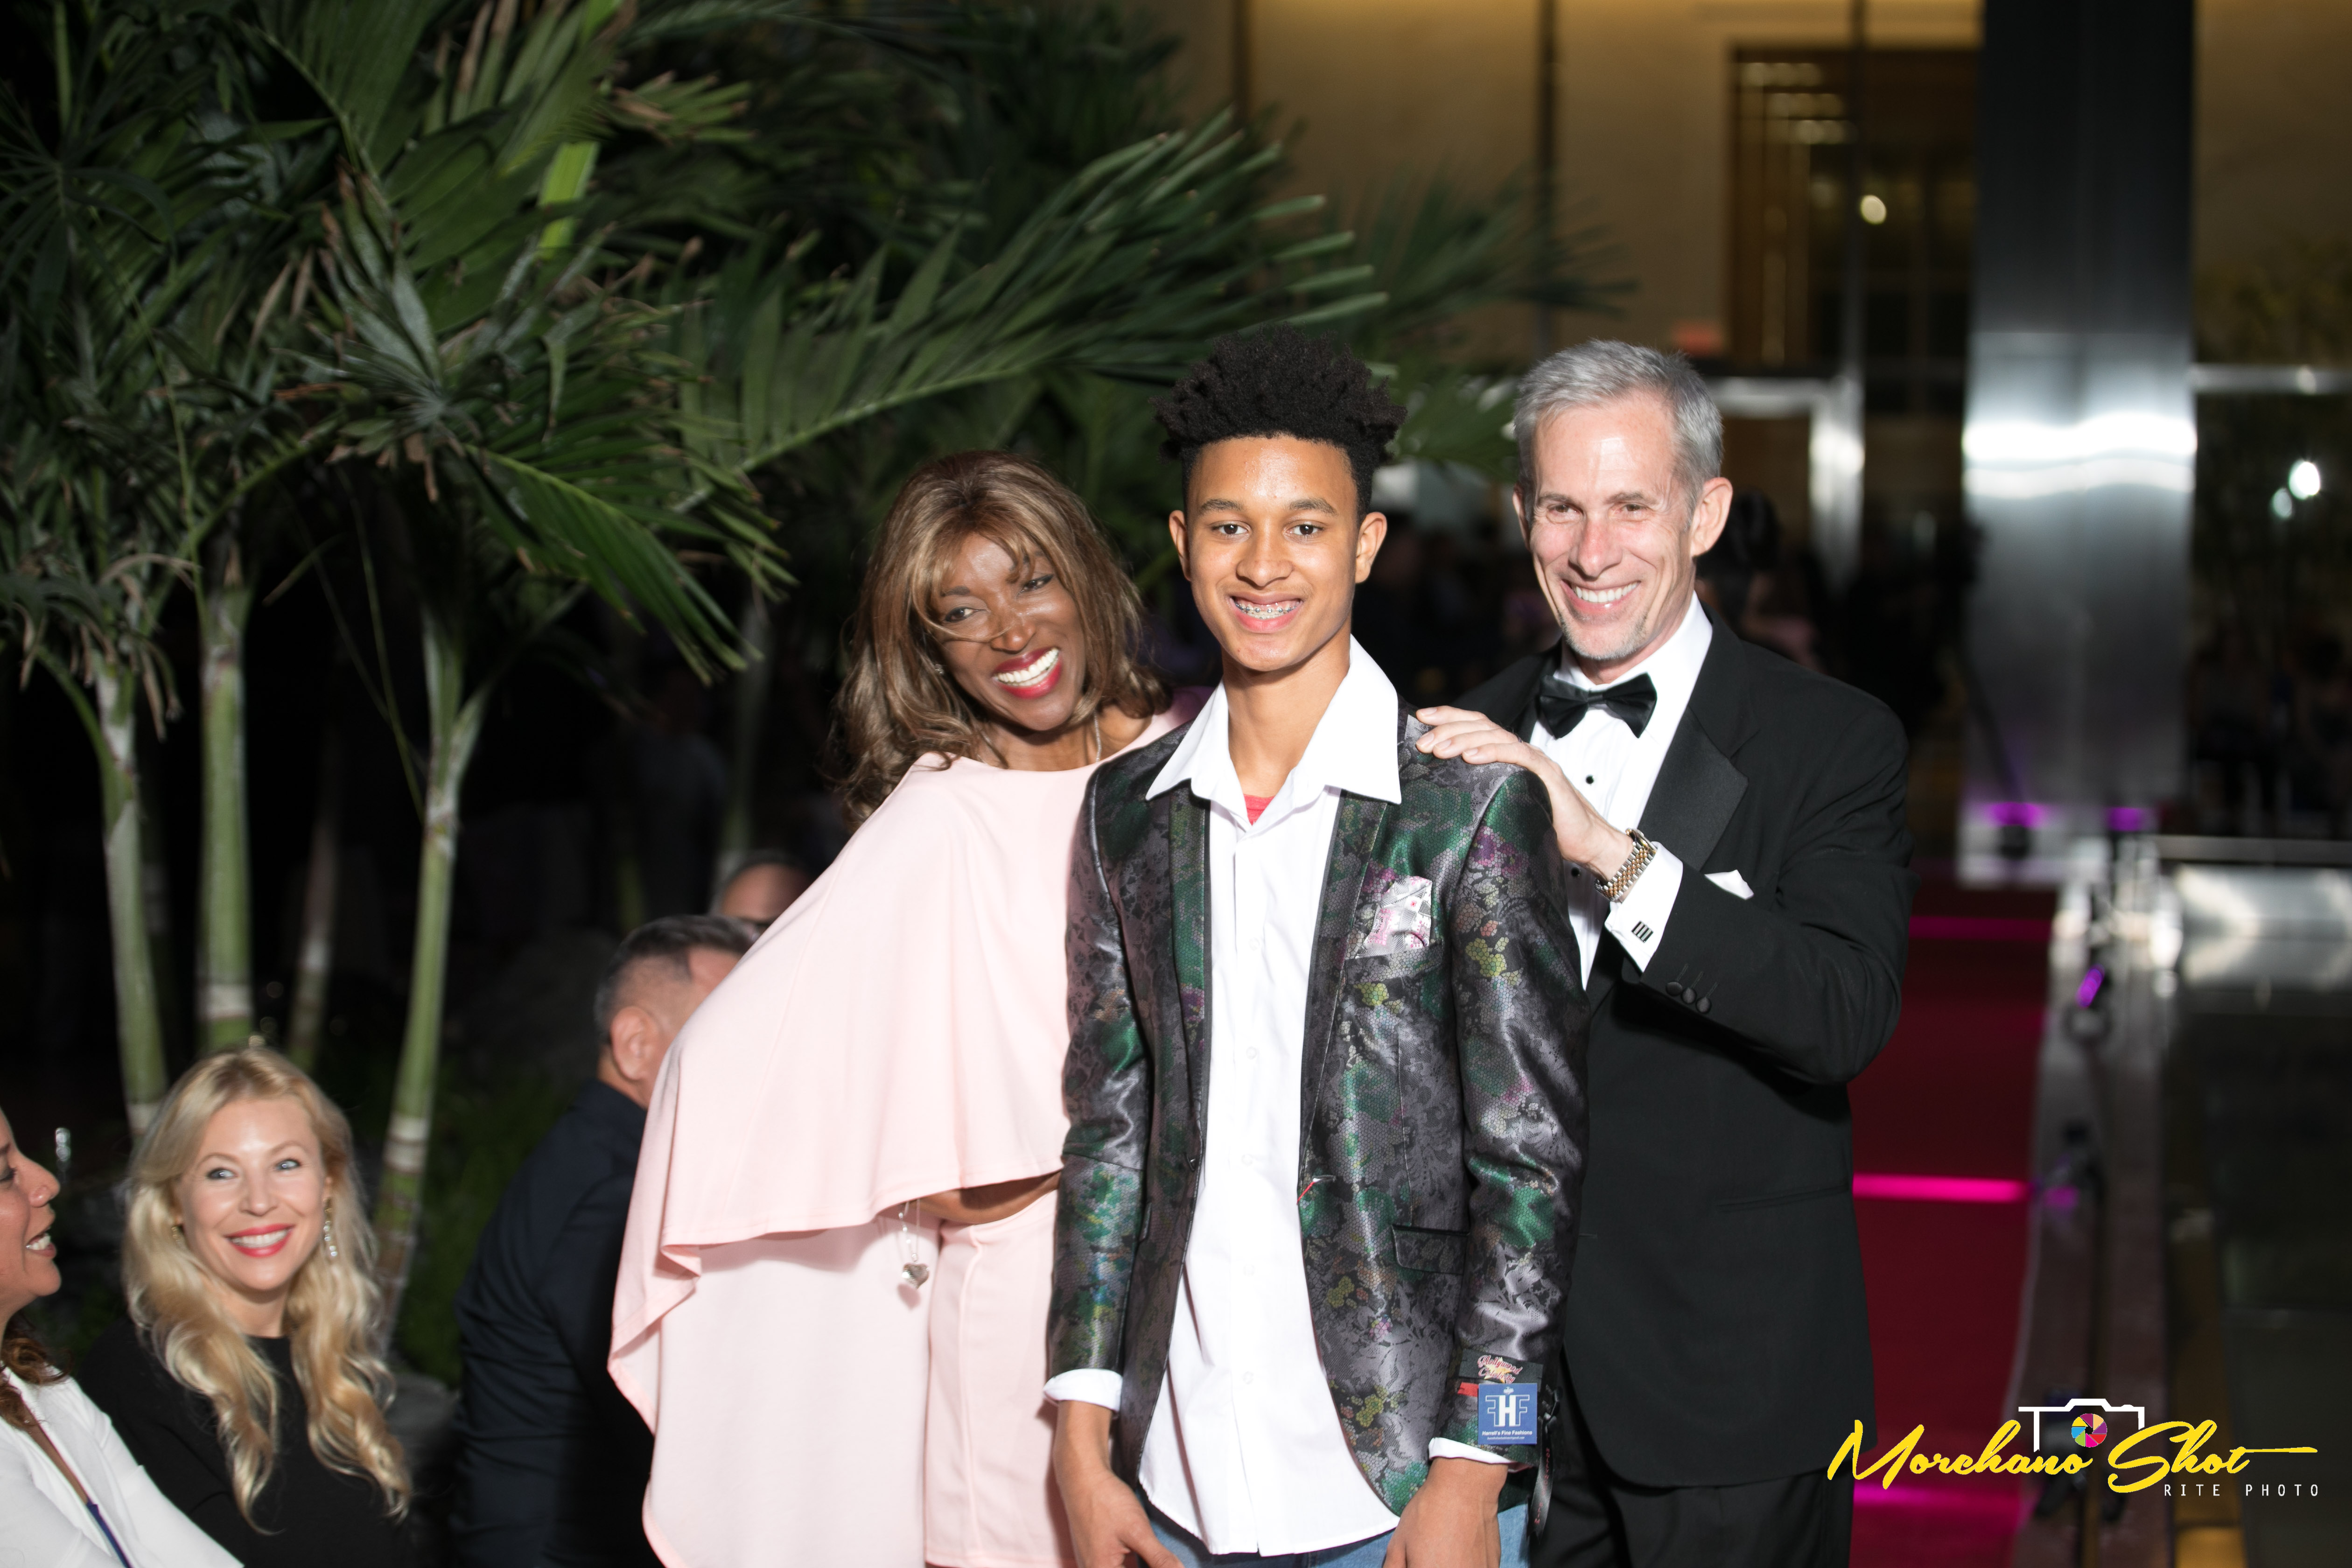 Fashion Night on Brickell Founder Mayra Joli and event Co-host Steven Befera on the runway at Fashion Night on Brickell 2018